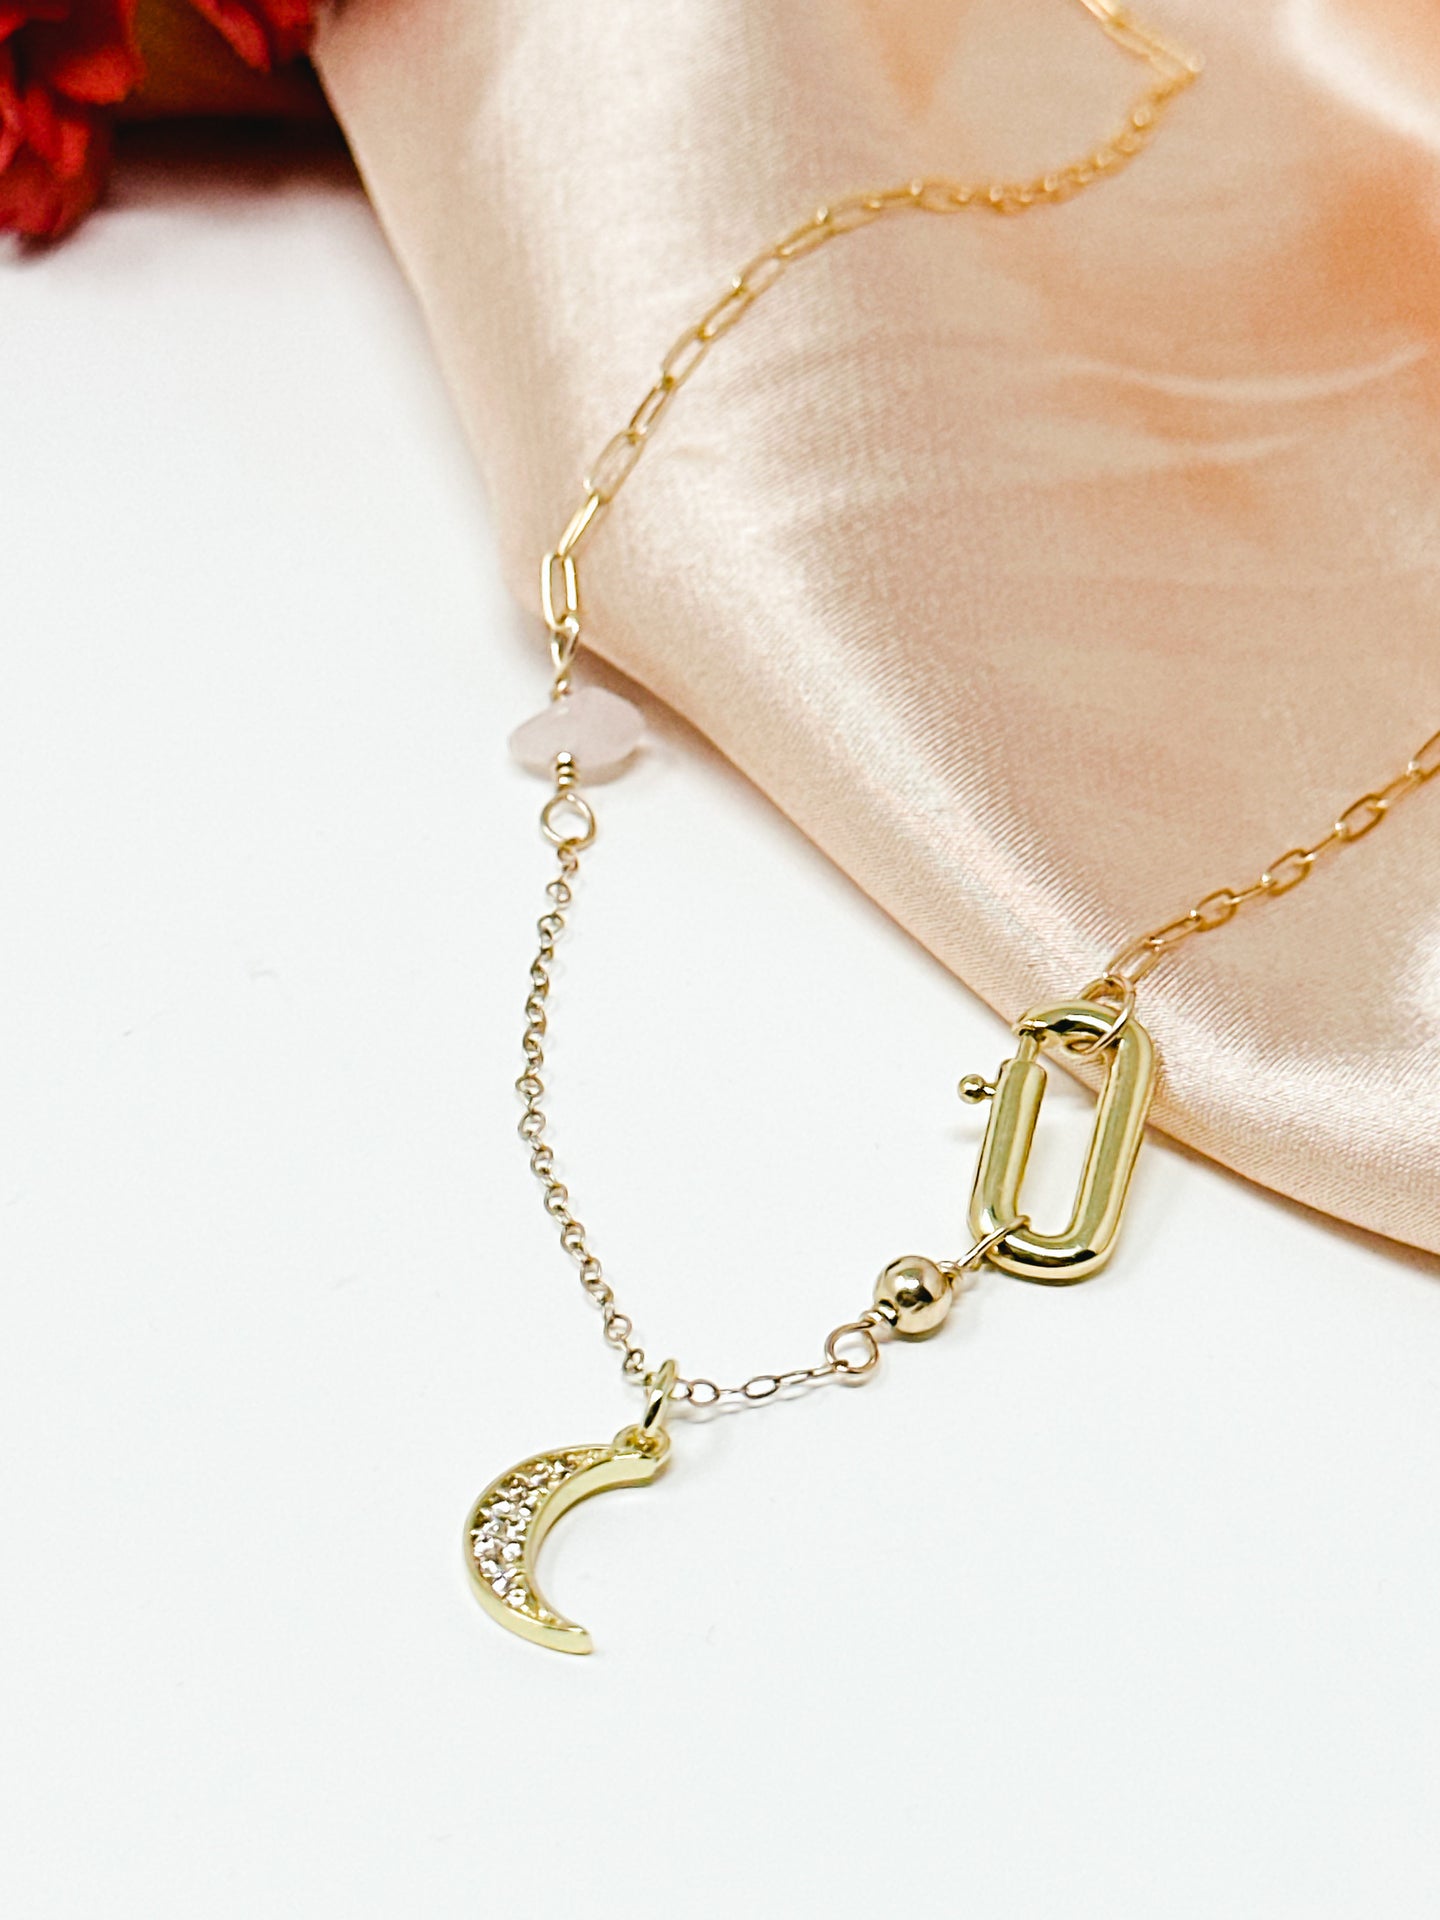 Moon Charm With Carabiner on Paper Clip Chain-Gold Filled Necklace.